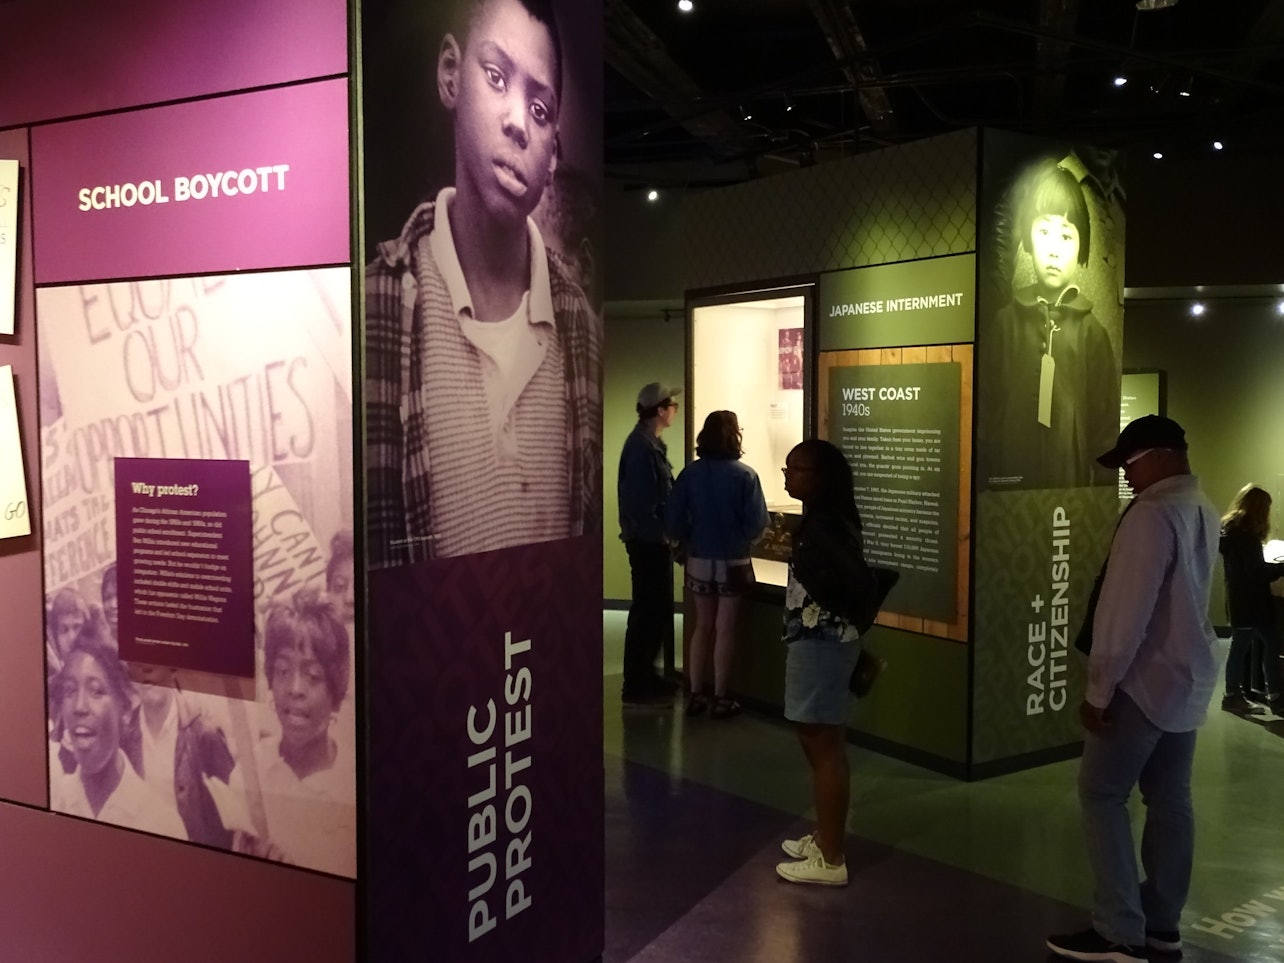 Chicago History Museum Admission - Accommodations in Chicago